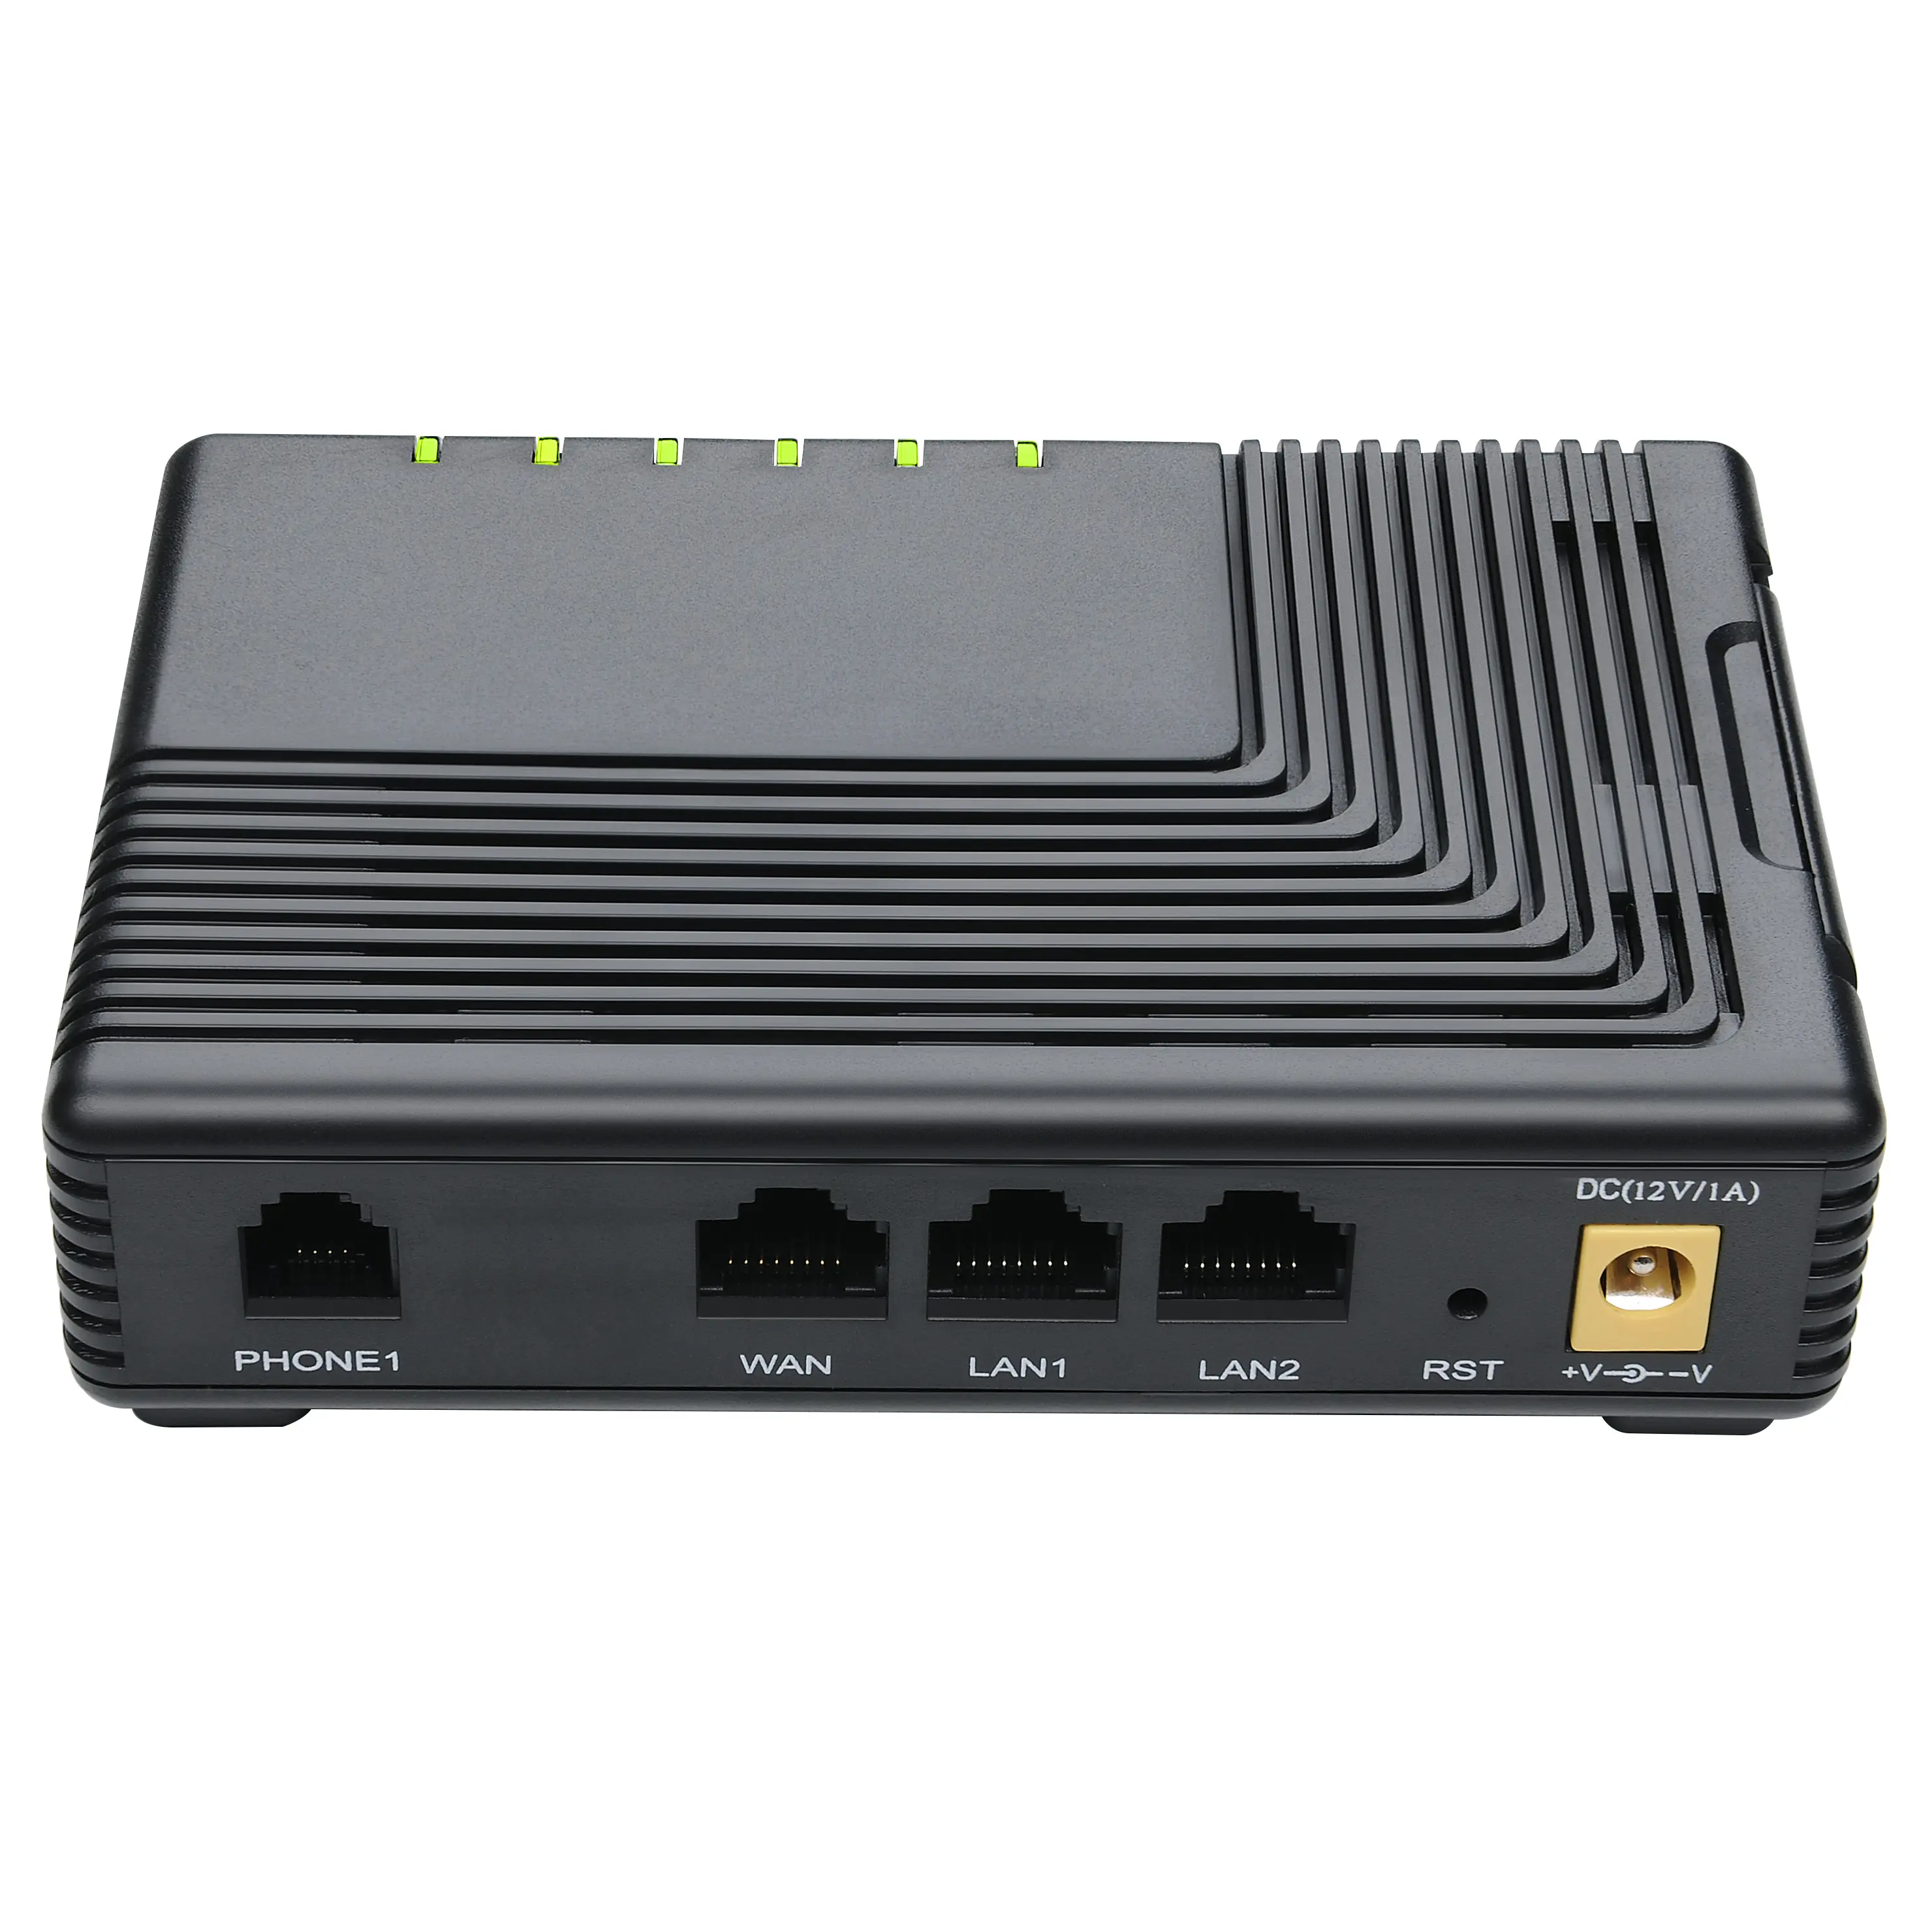 Voip to gsm gateway supporta T.38, T.30 e G.711 standard fax